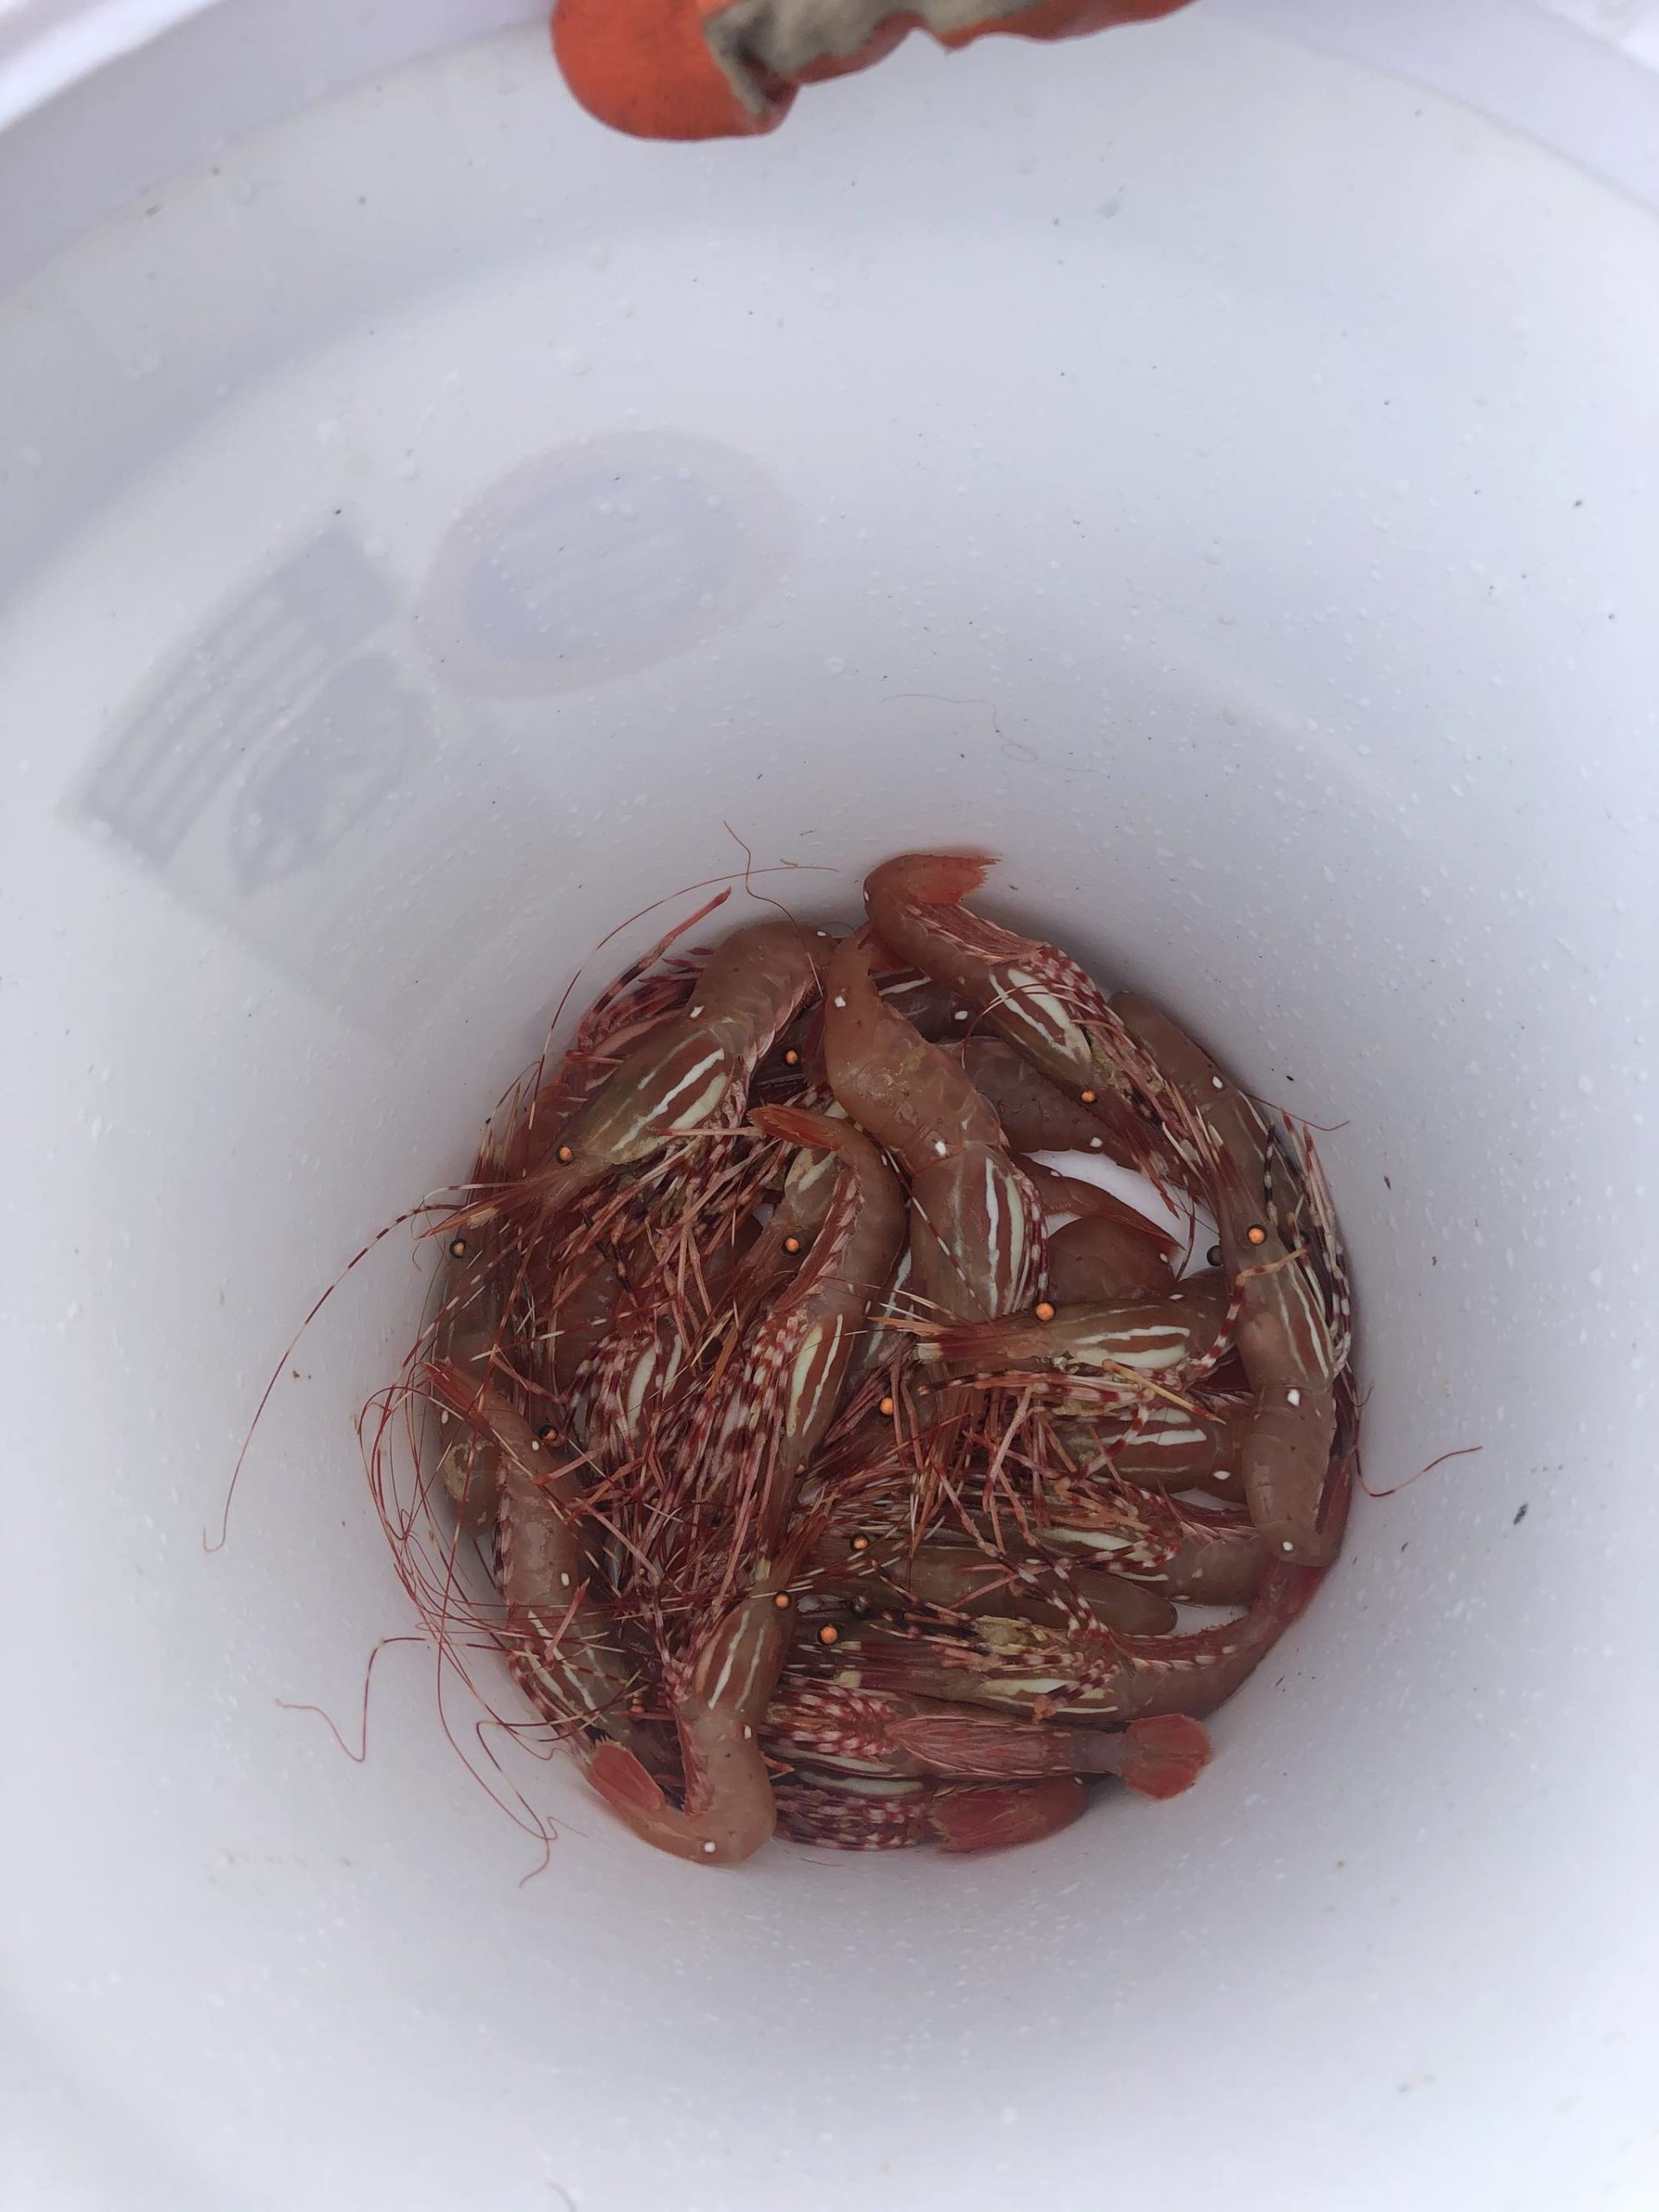 Photo by Emily Gilbert/Whidbey News-Times
State Department of Fish and Wildlife enforcement officer Ralph Downes said it’s important to sort shrimp as soon as the the crustaceans are brought onboard.